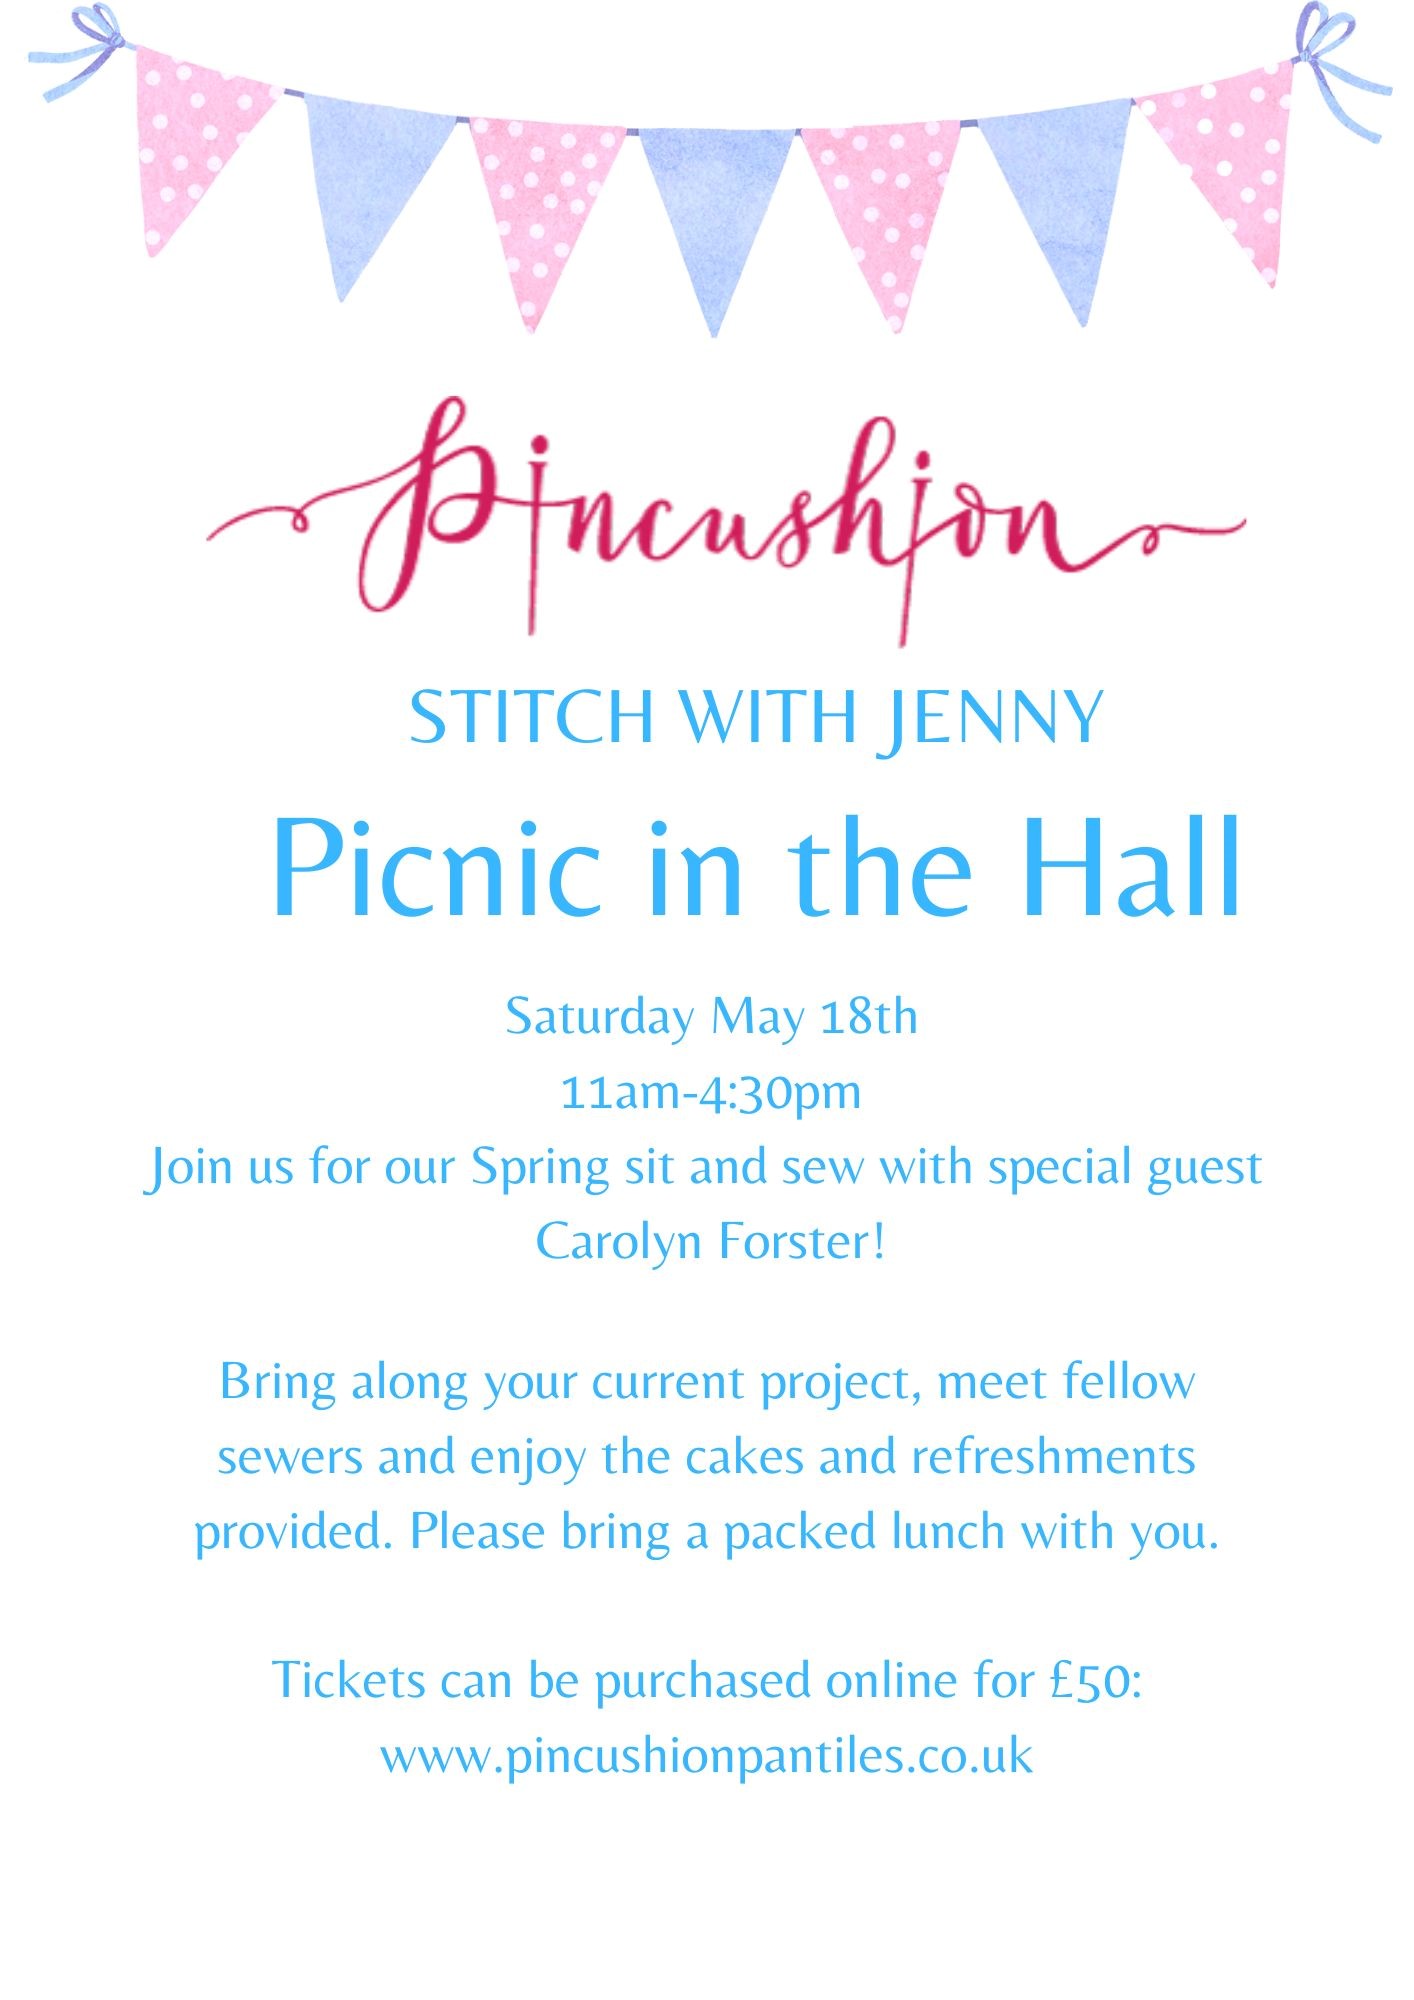 SOLD OUT – Picnic in the Hall